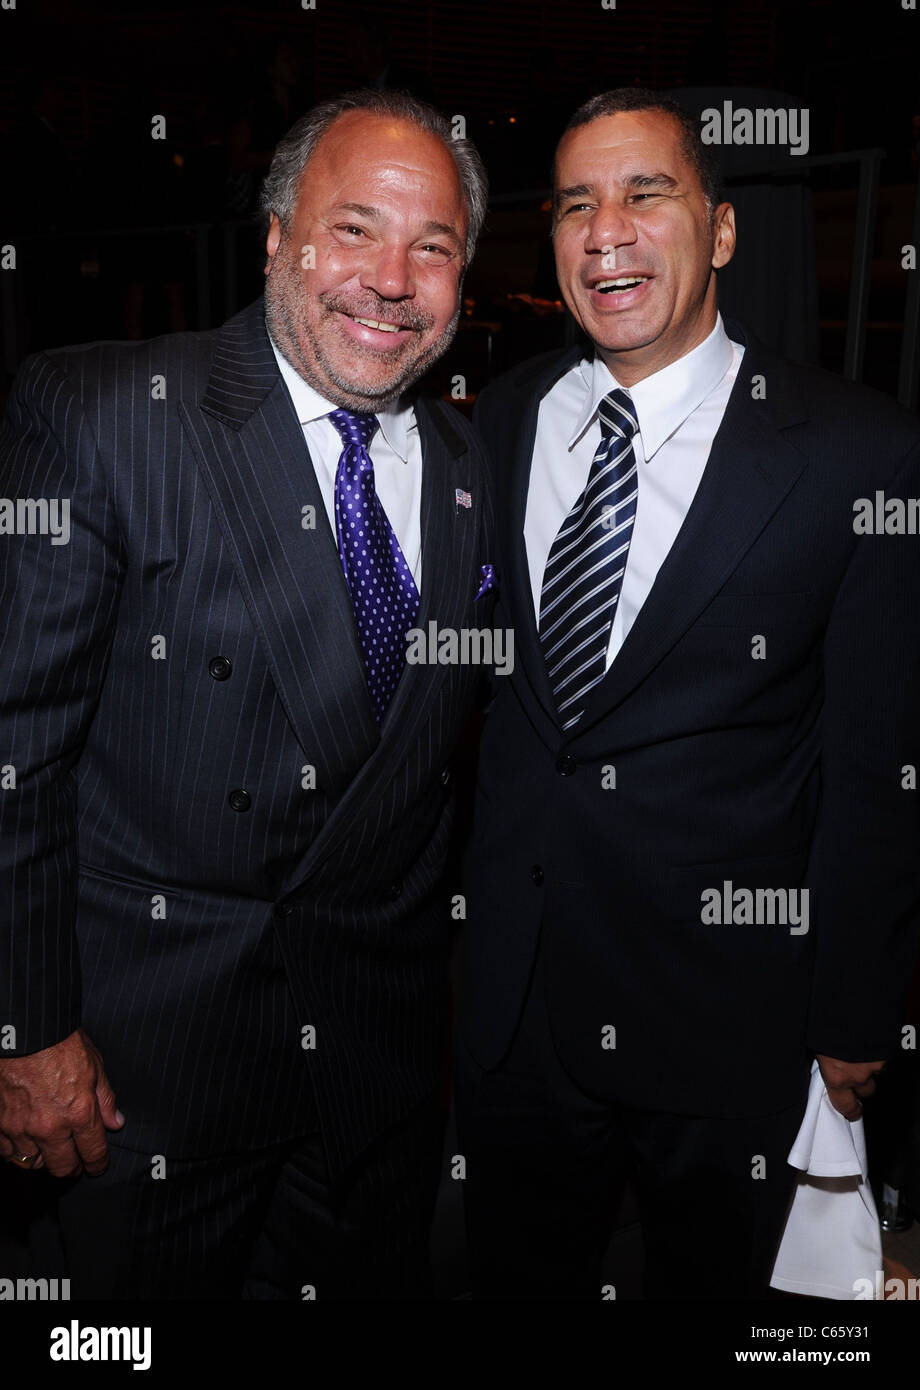 Bo Dietl, Governor David Patterson in attendance for A Celebration of Courage Benefitting Hope and Heroes Children's Cancer Fund, Jazz at Lincoln Center, Rose Theater, New York, NY September 23, 2010. Photo By: Rob Rich/Everett Collection Stock Photo